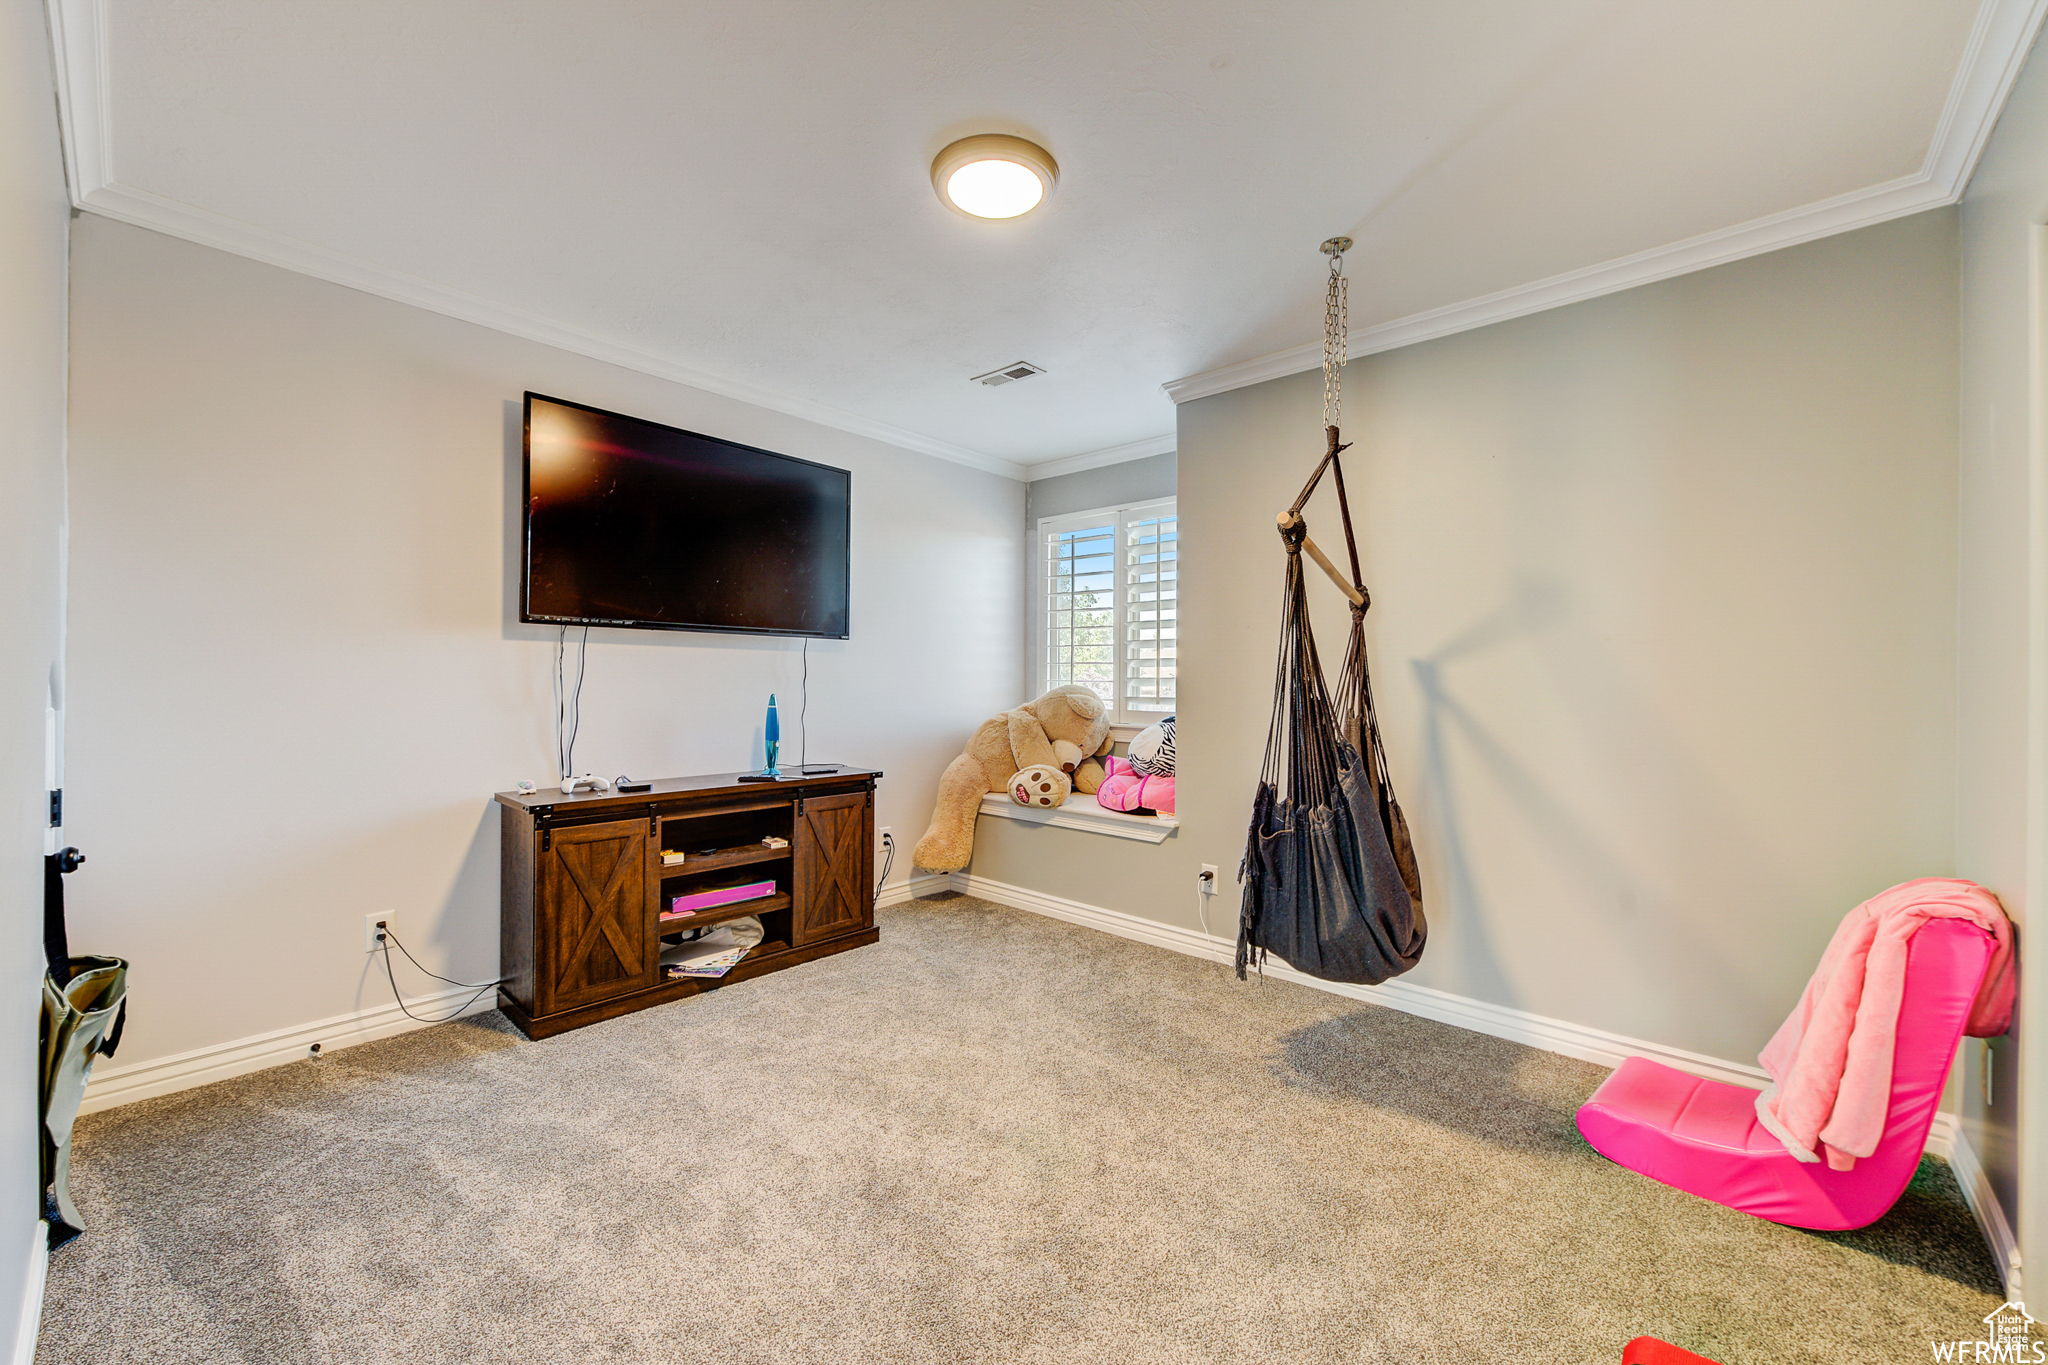 Recreation room with crown molding and carpet